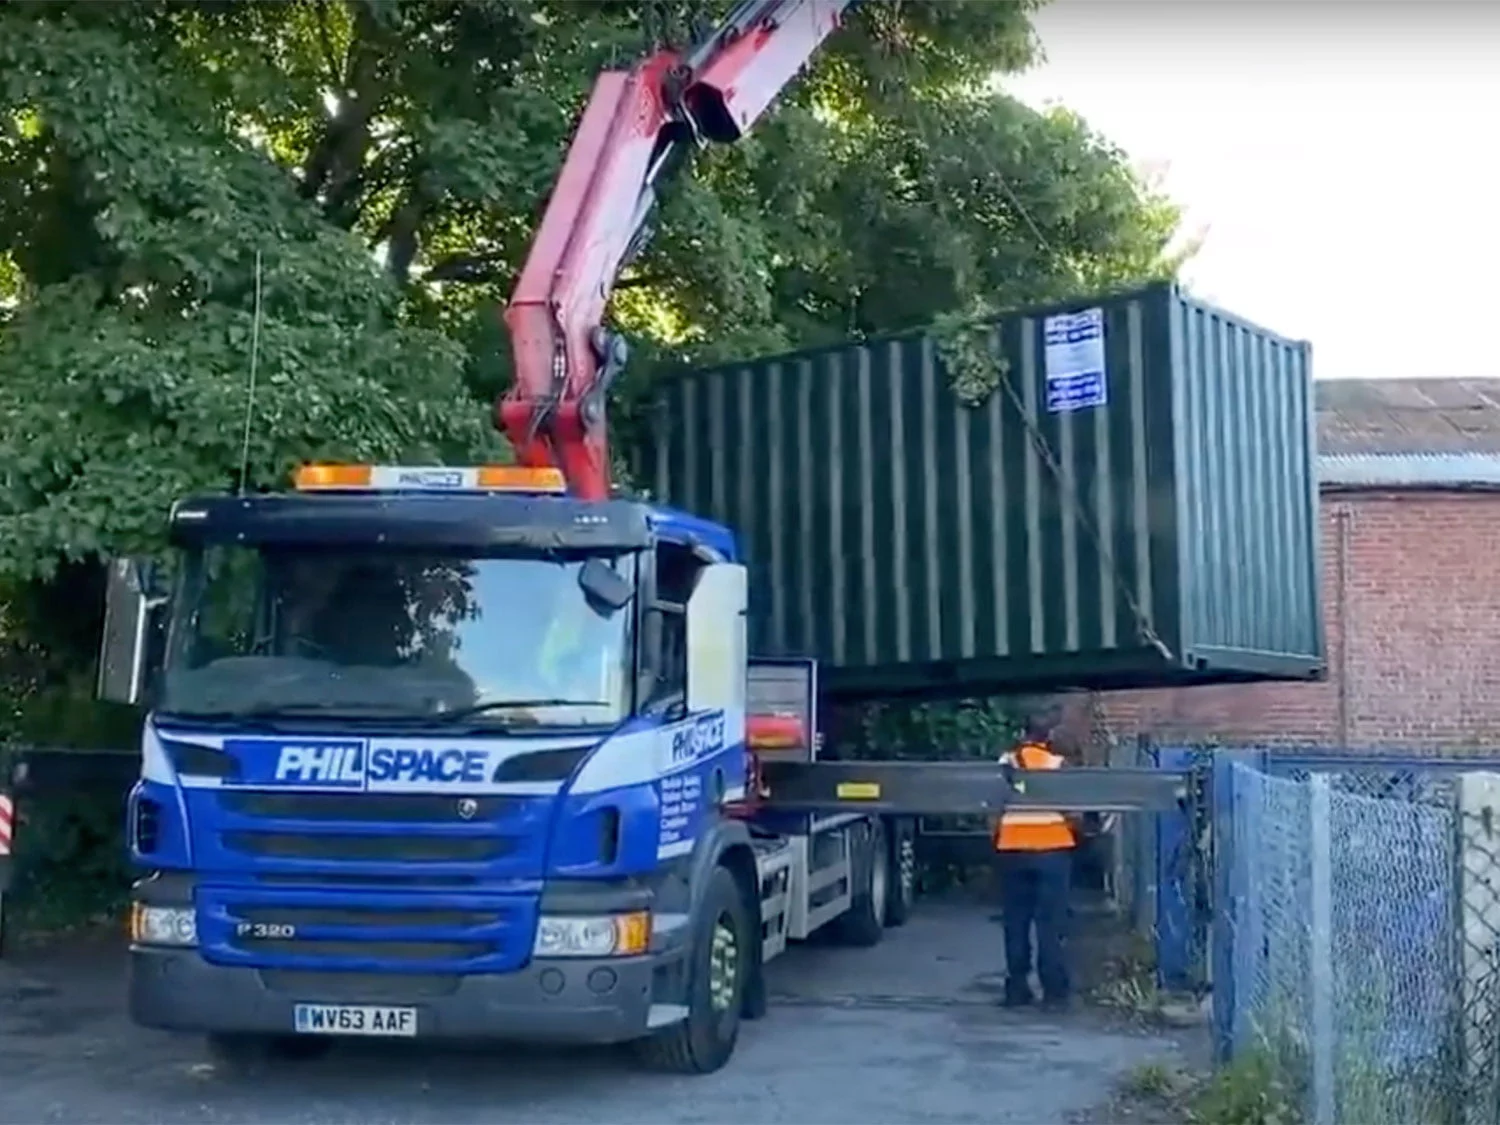 Philspace truck delivering storage unit for Meon Valley Food Bank